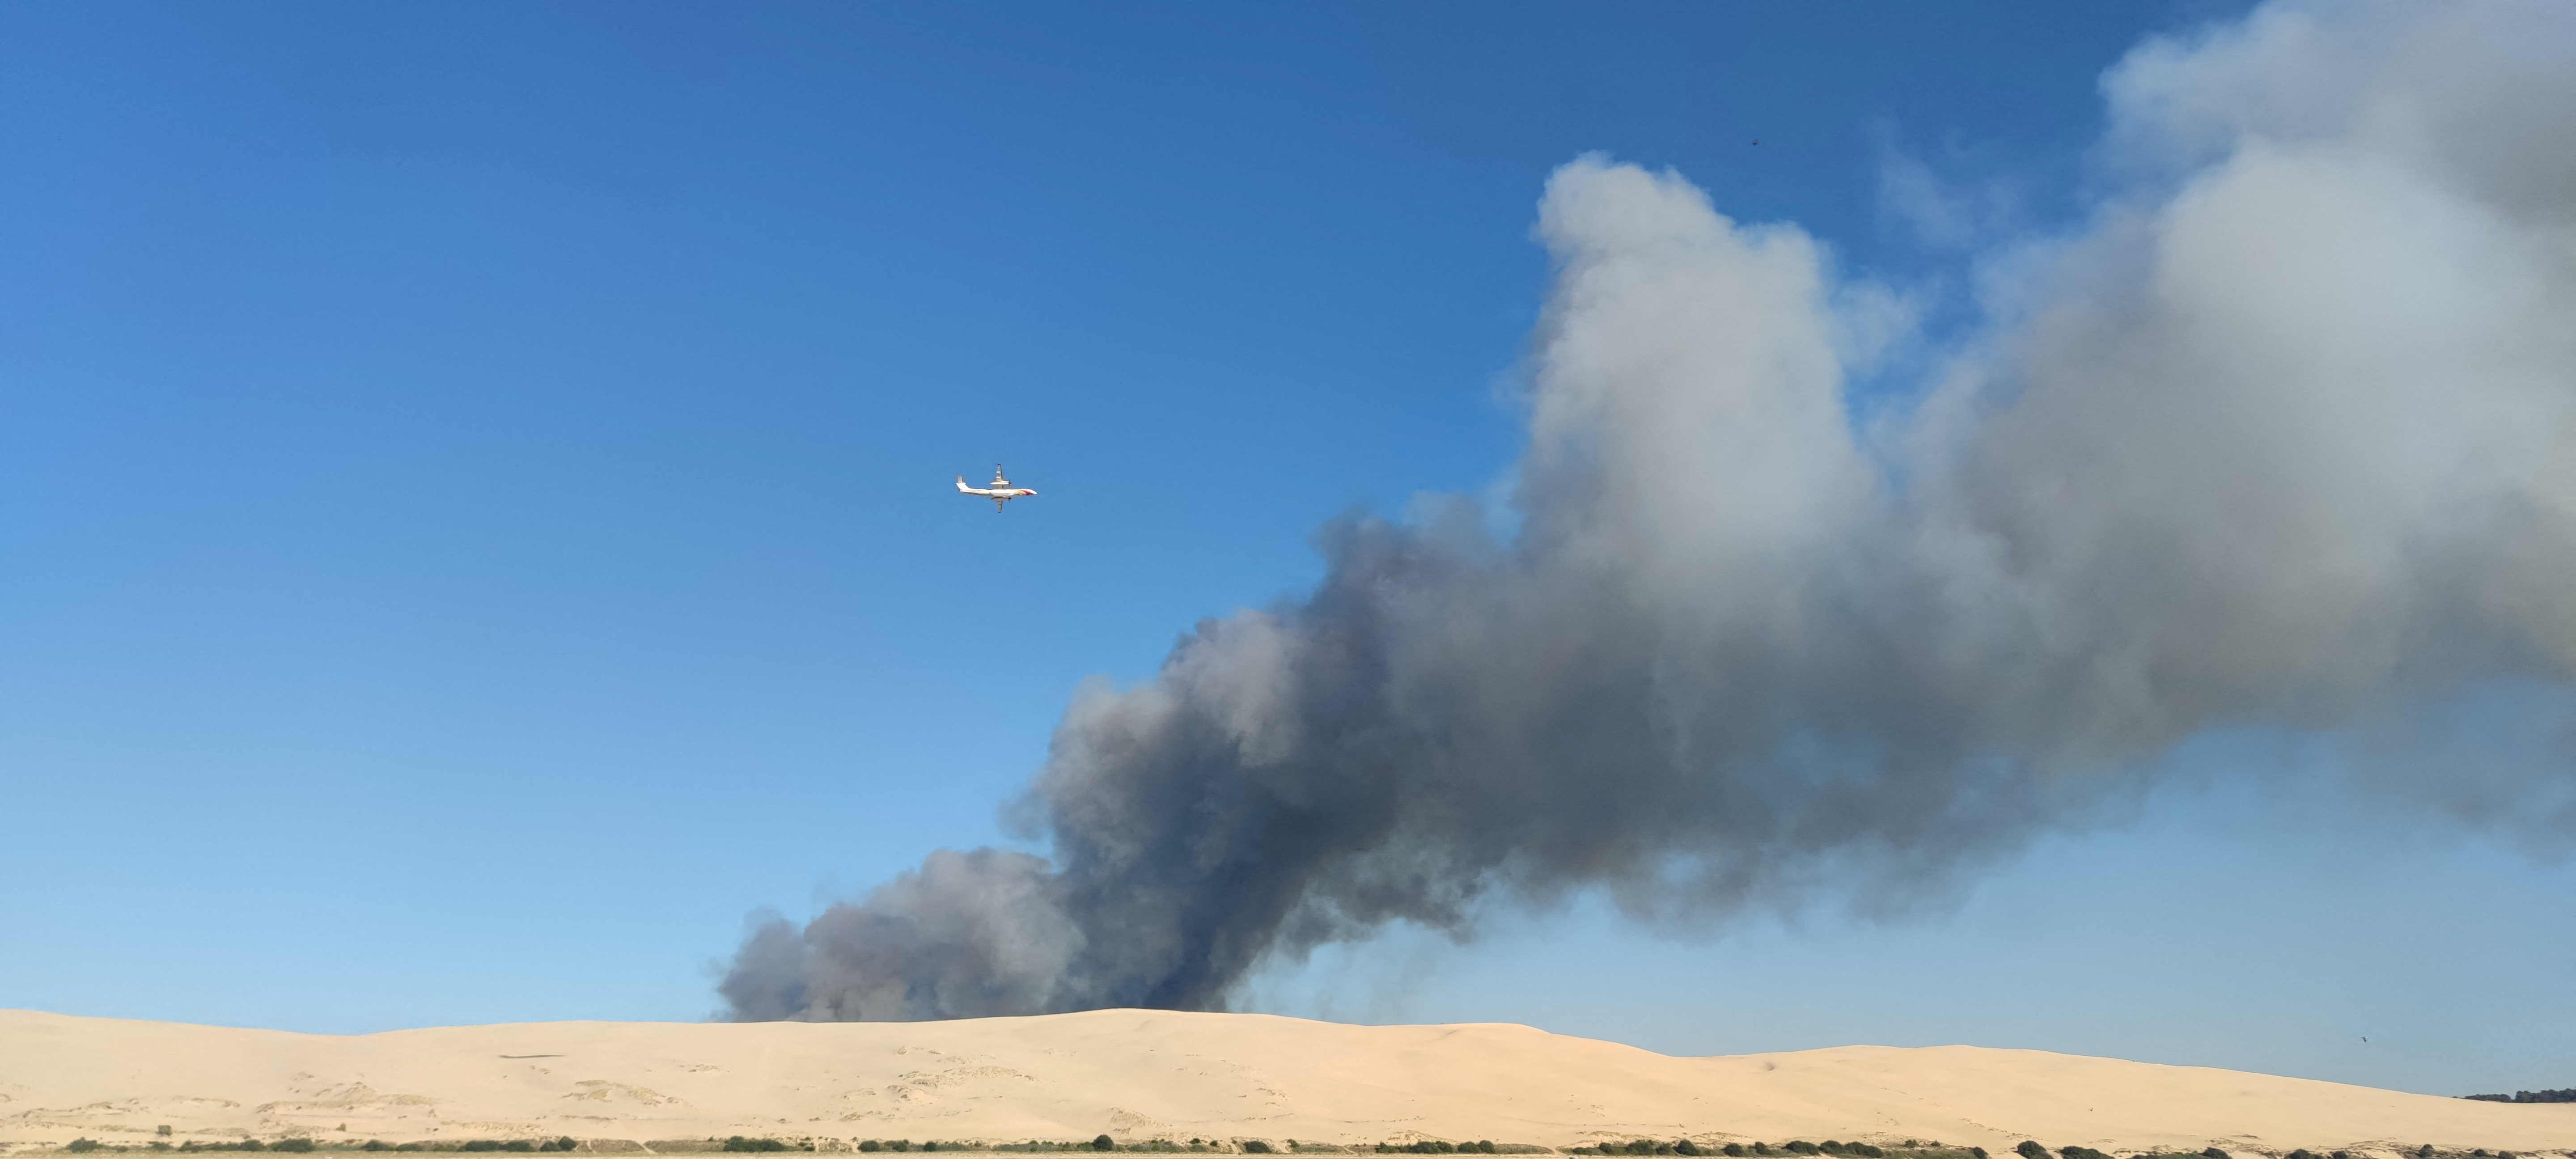 A general view shows smoke rising from the Gironde forest fires as seen from Dune de Pilat